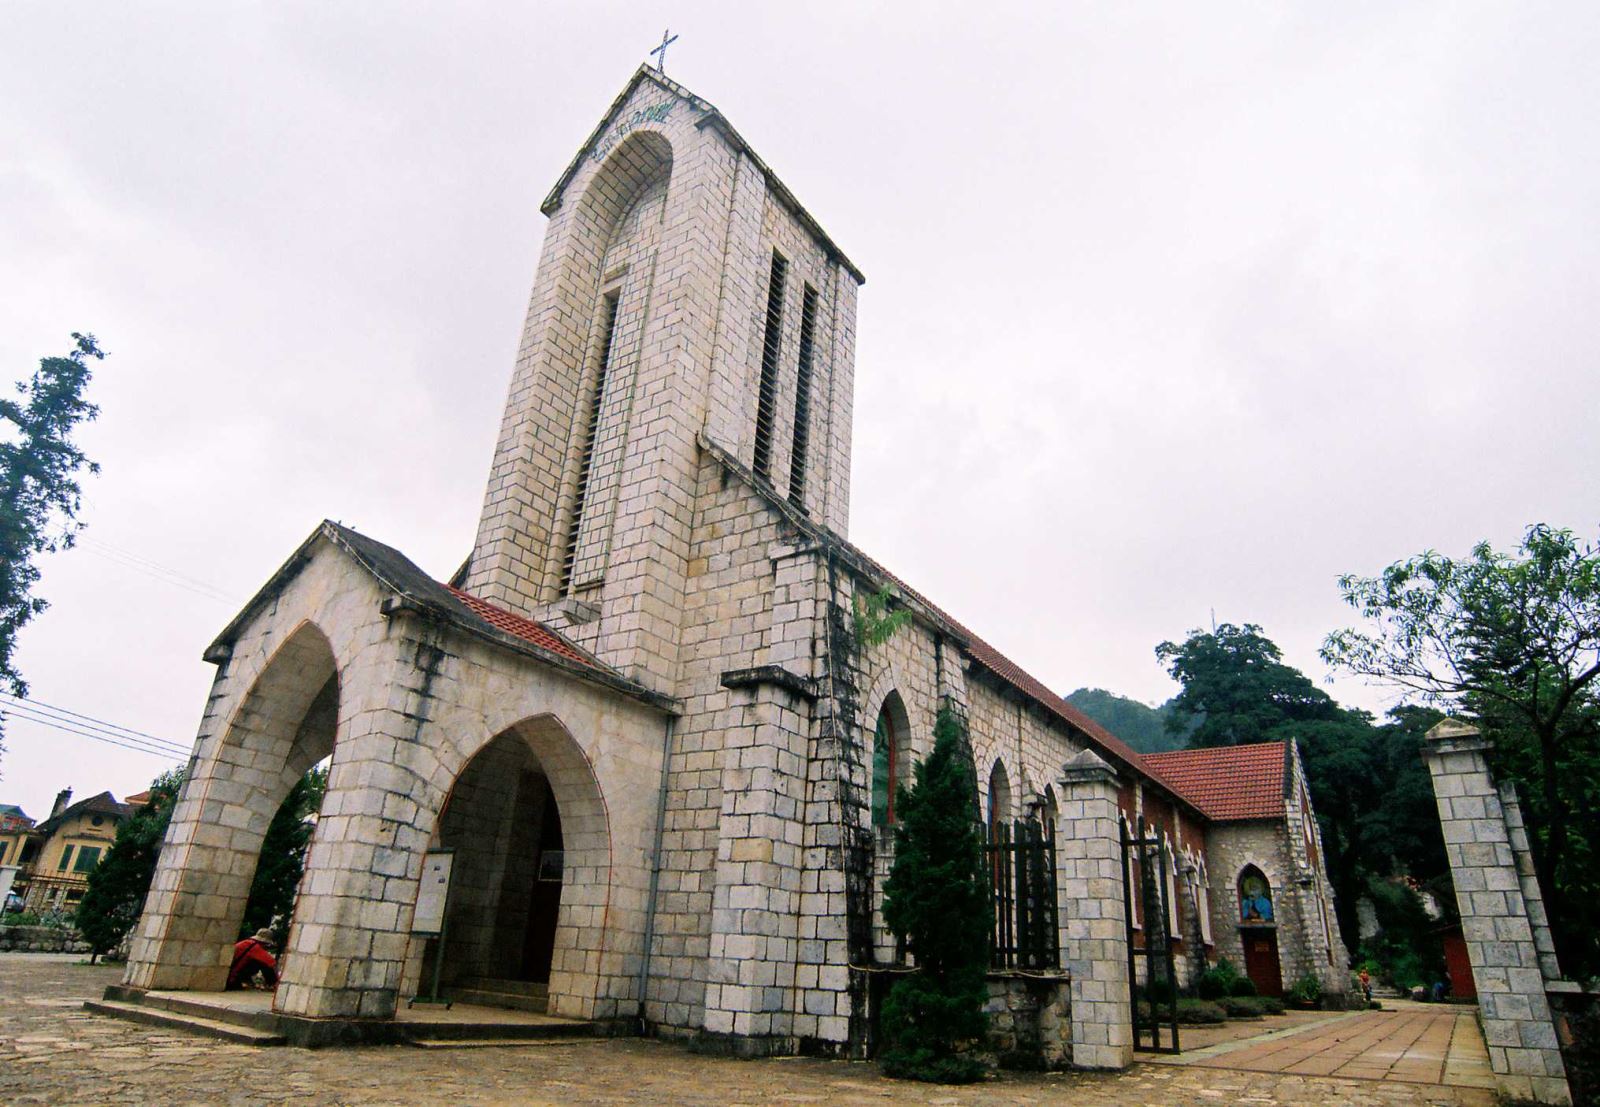 Marvel at the architectural design of the Holy Rosary Church of Sapa